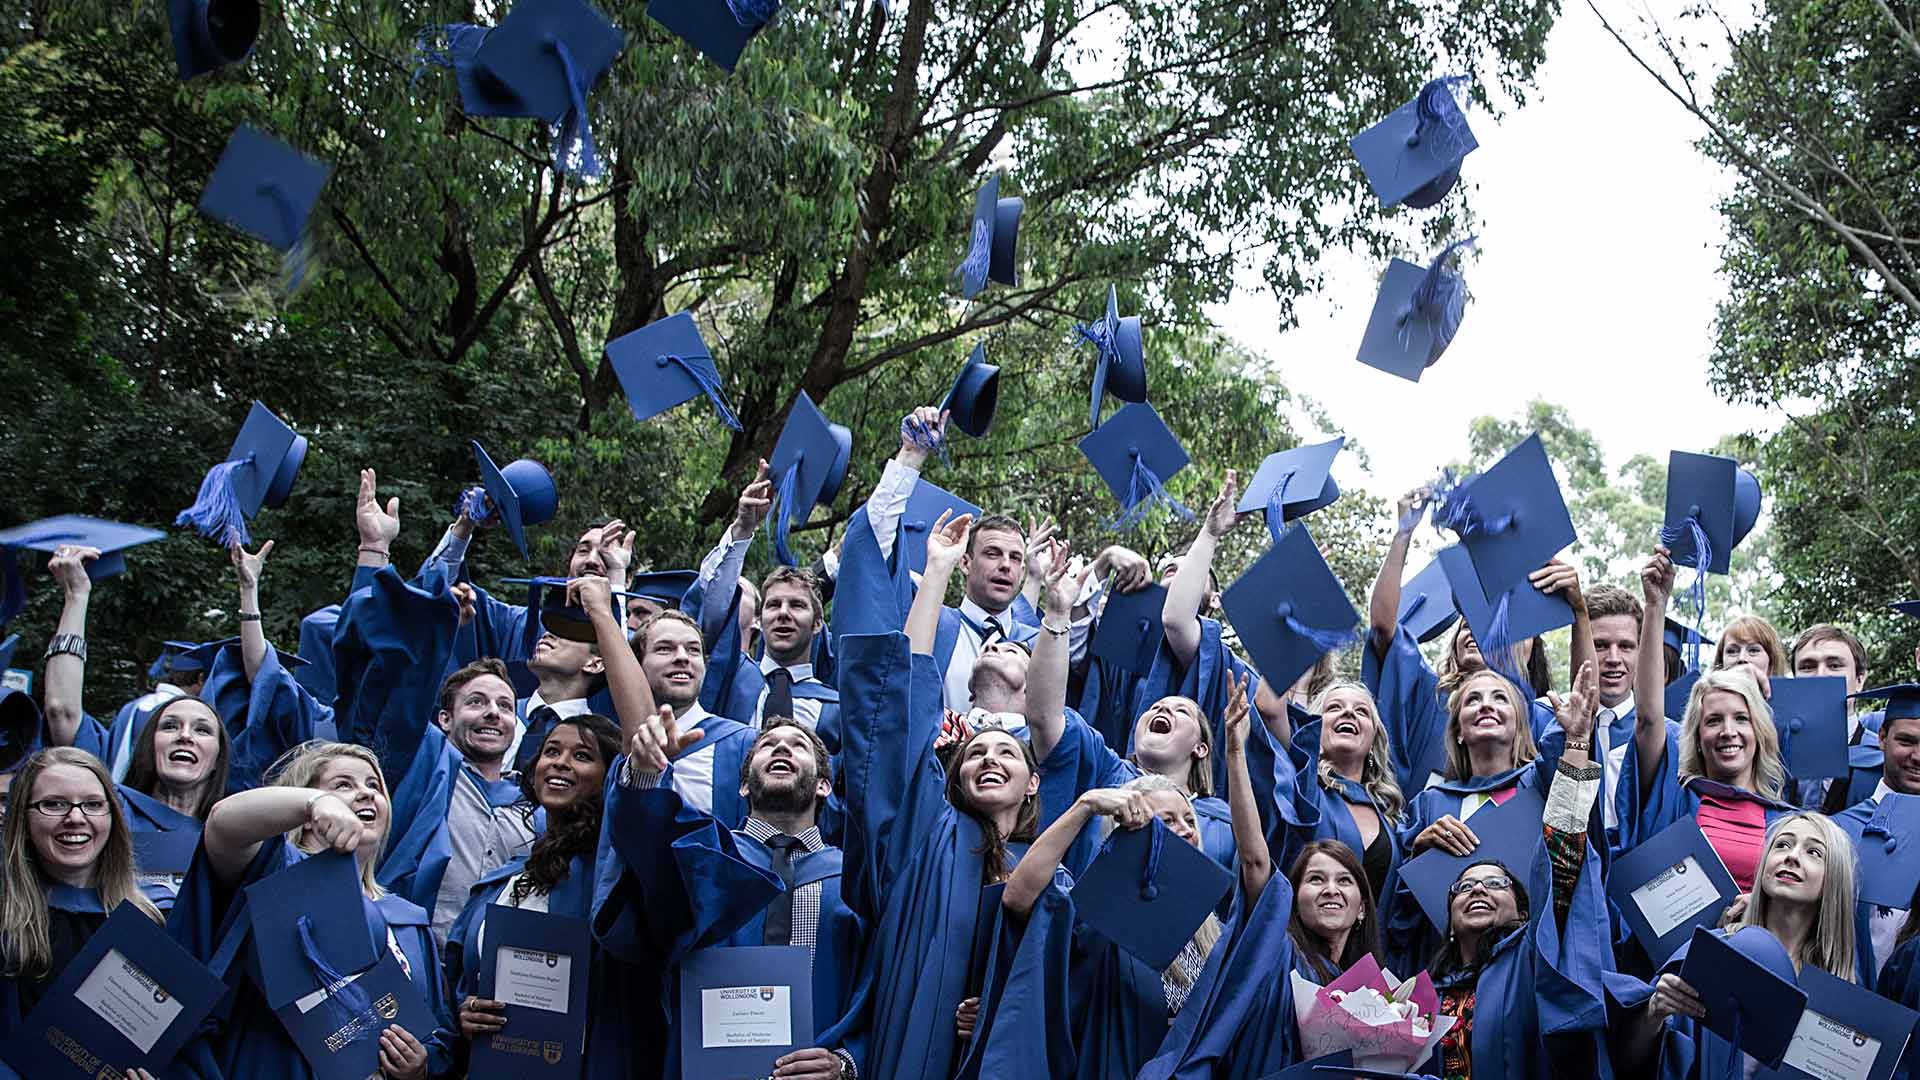 UOW rated among the world’s best young universities